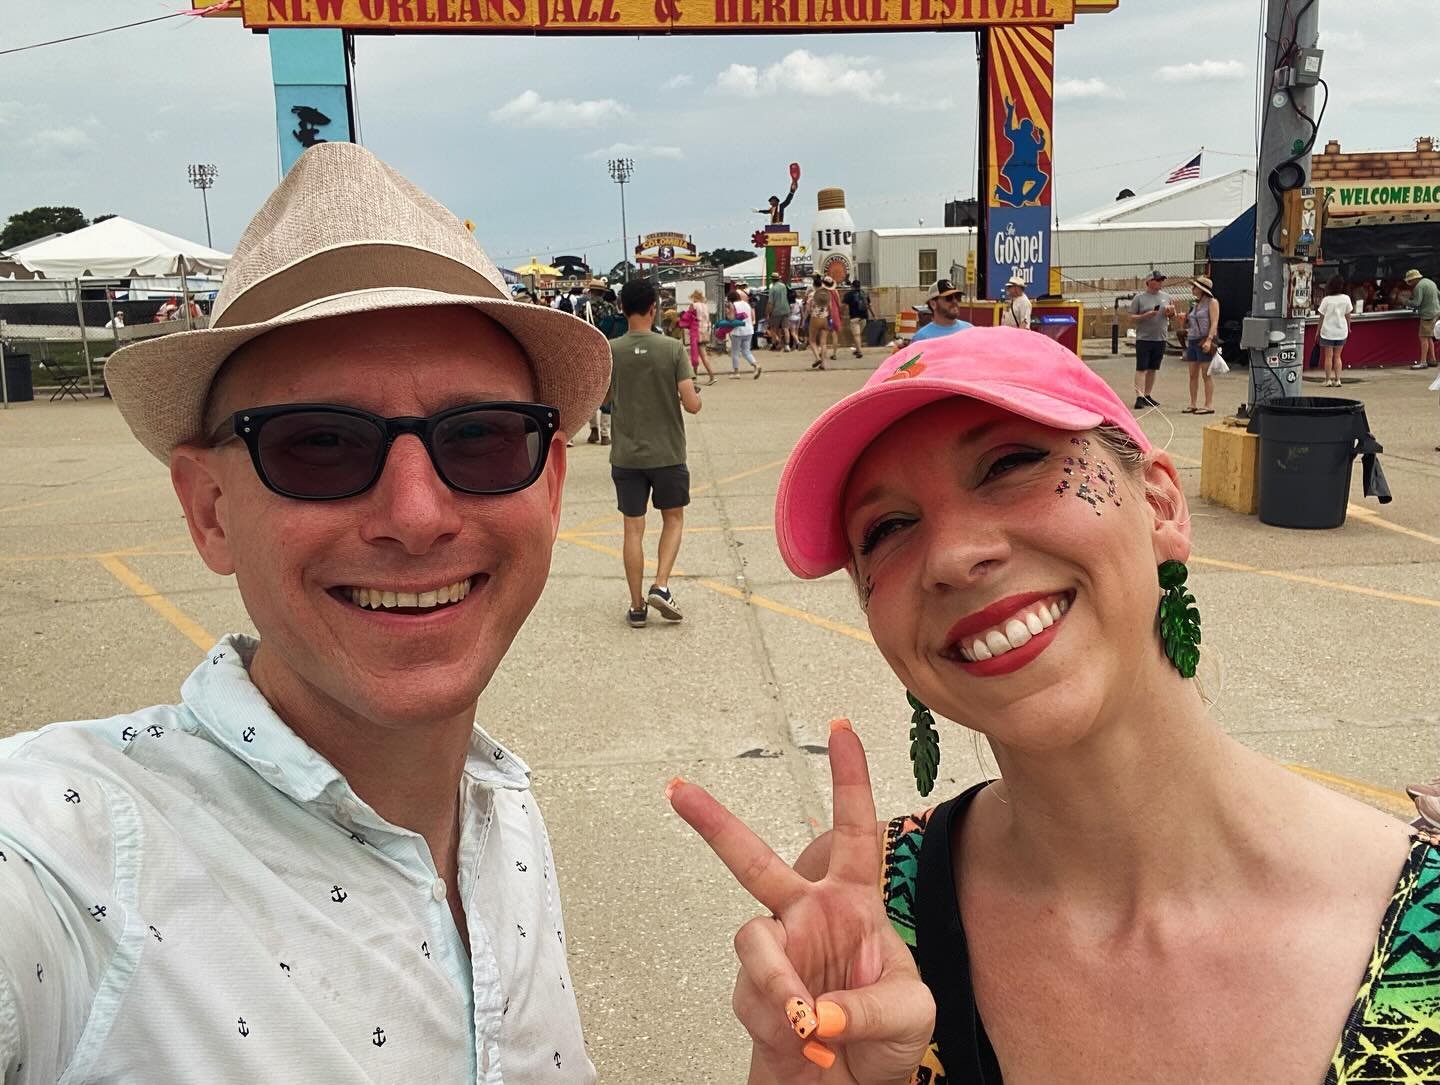 Jazz Fest yesterday! Met some new friends, didn&rsquo;t sweat too much, and heard Tower of Power up close and personal! @mezzoihnen @towerofpower @jazzfest